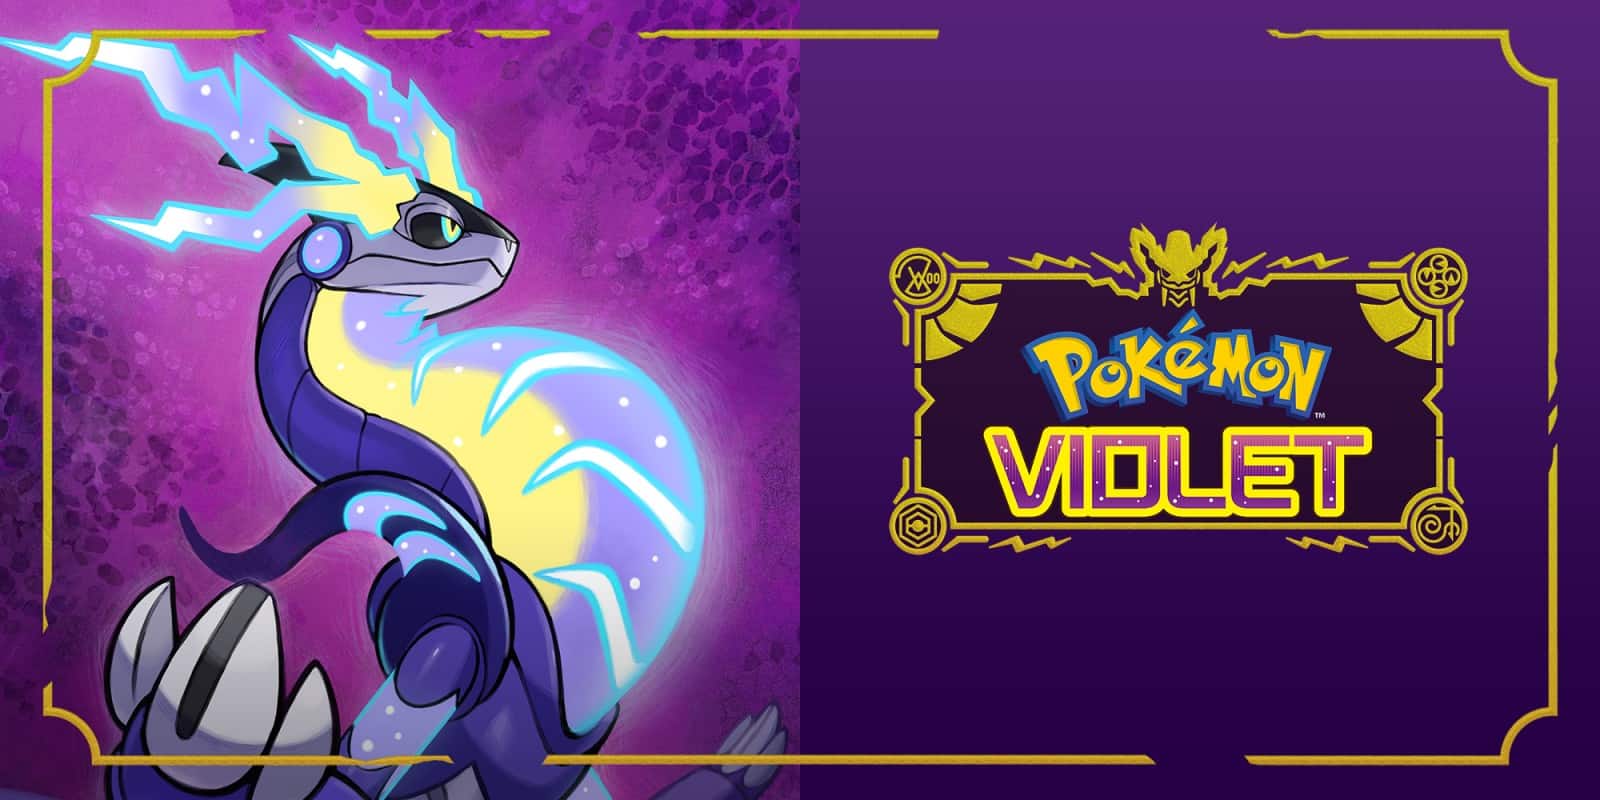 Game Freak announces Pokemon Scarlet and Violet DLC release date